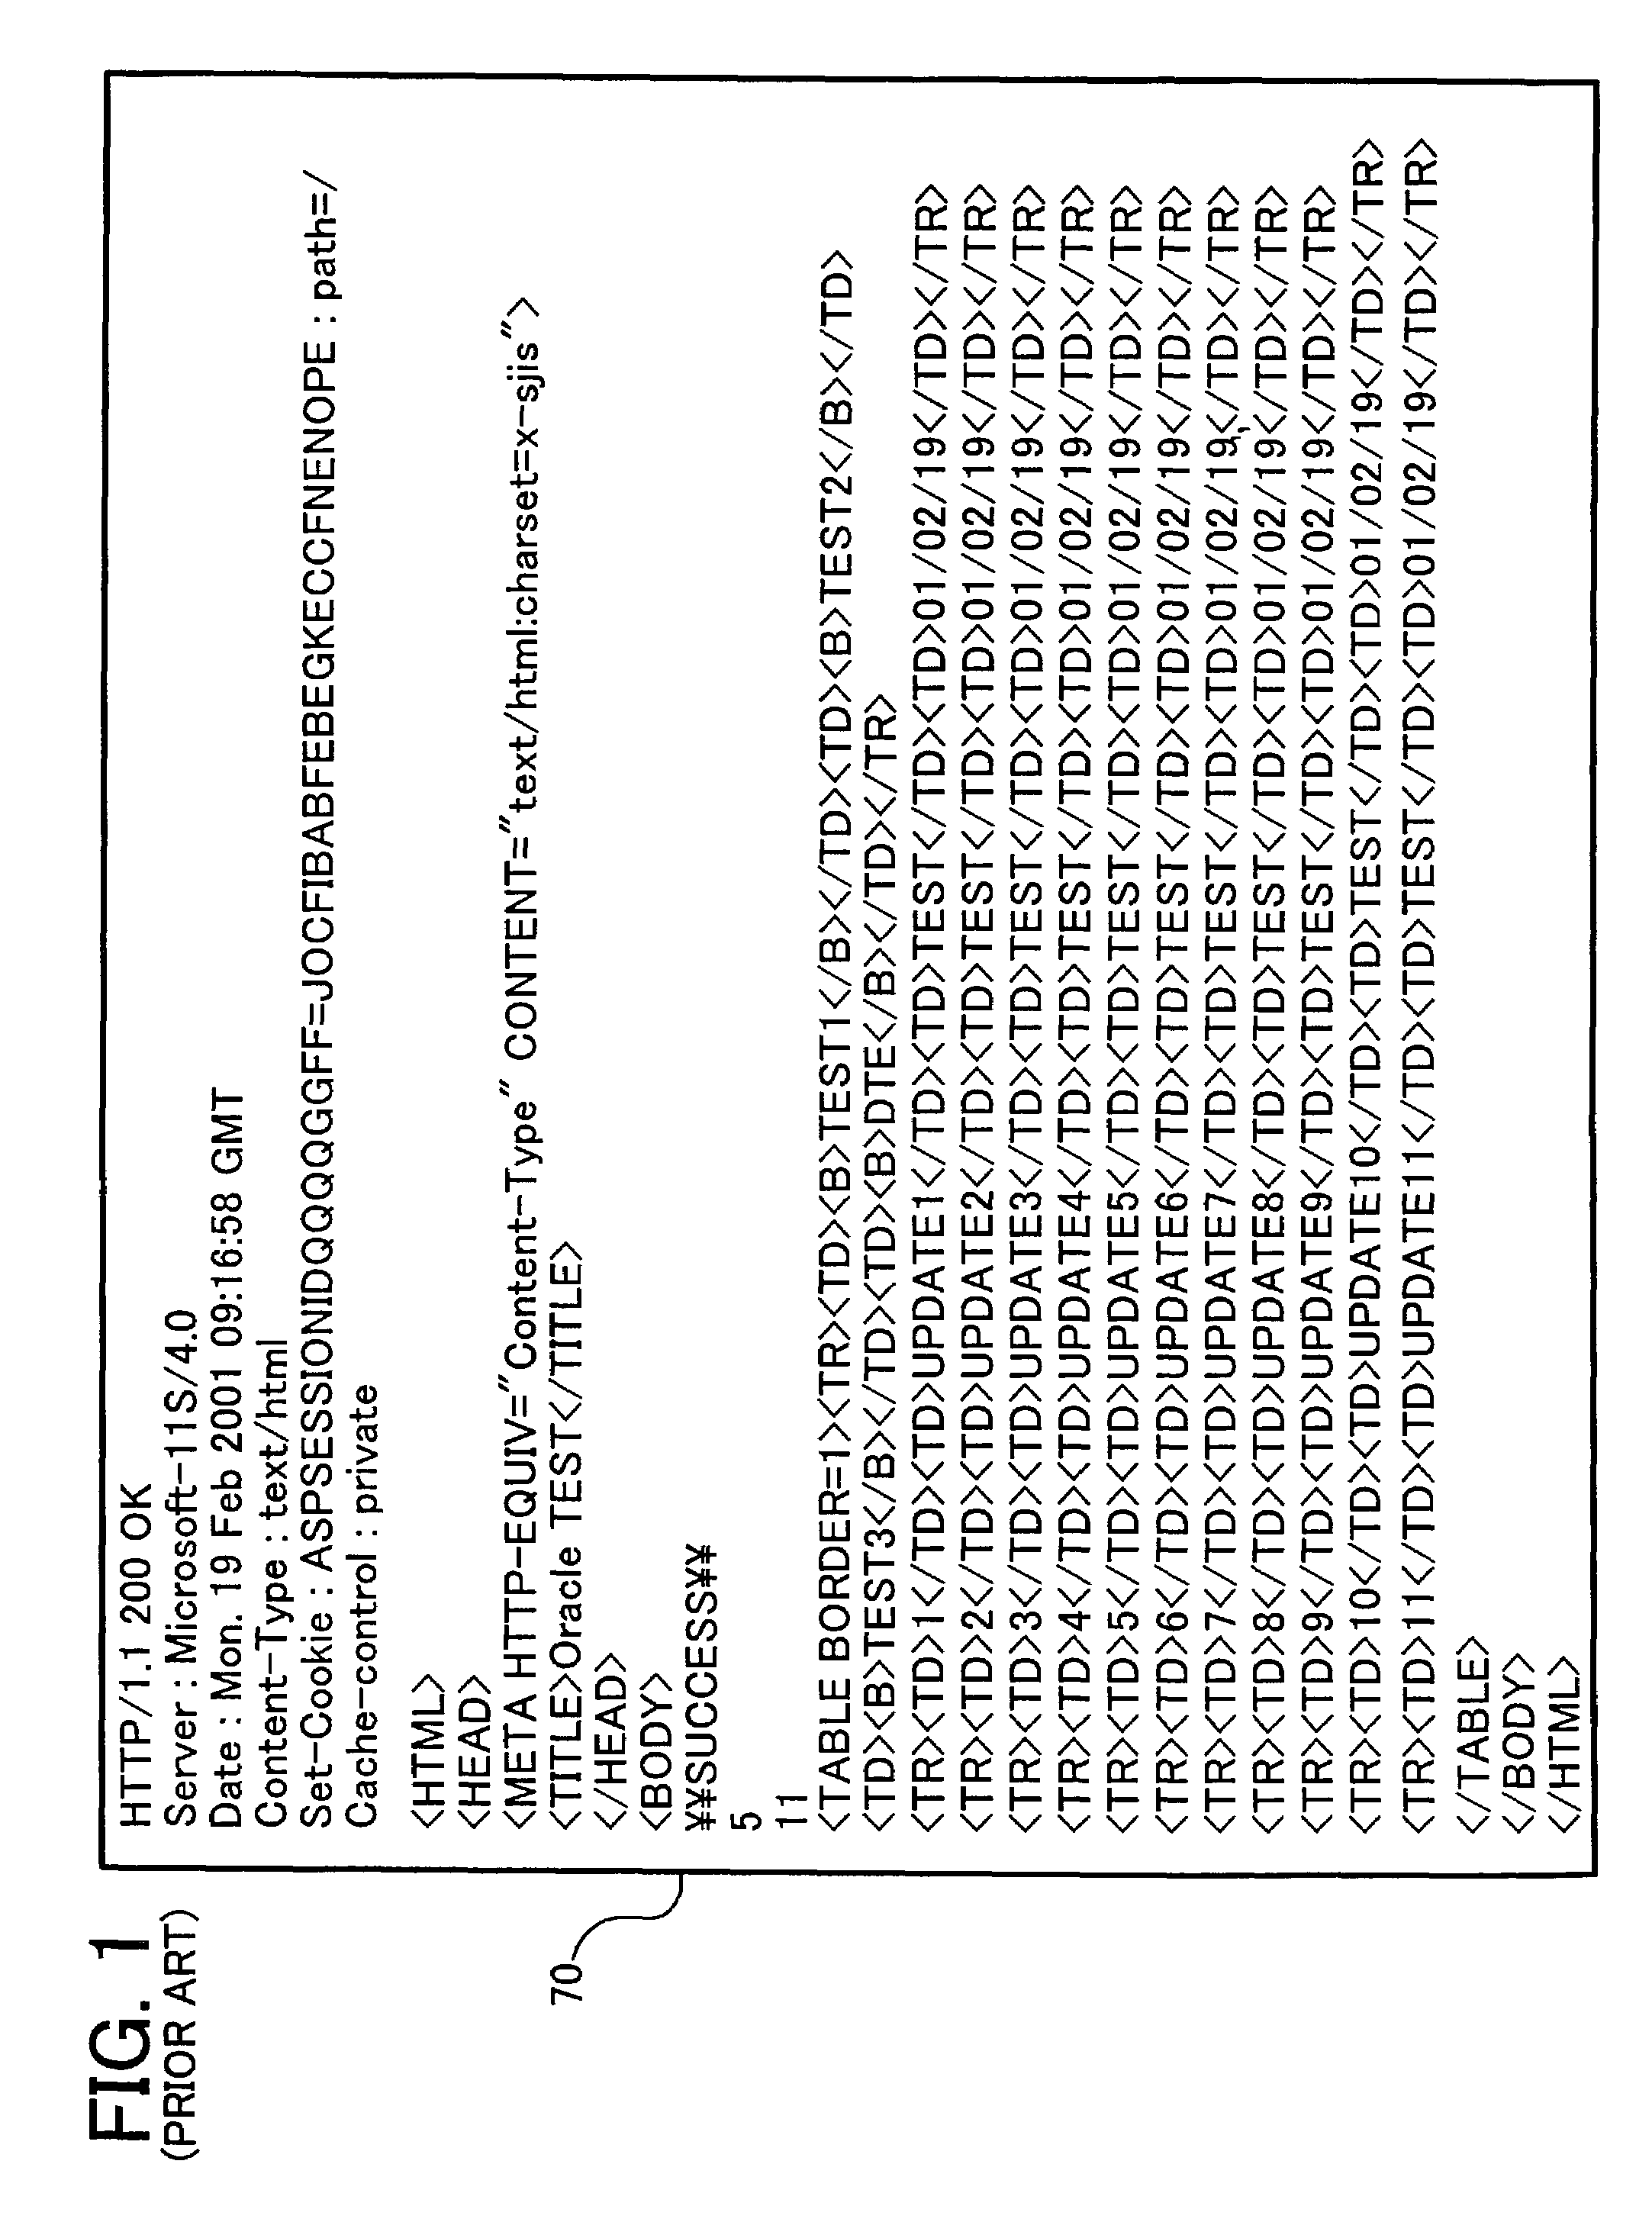 Method and apparatus for data retrieval from data server using a socket communications program